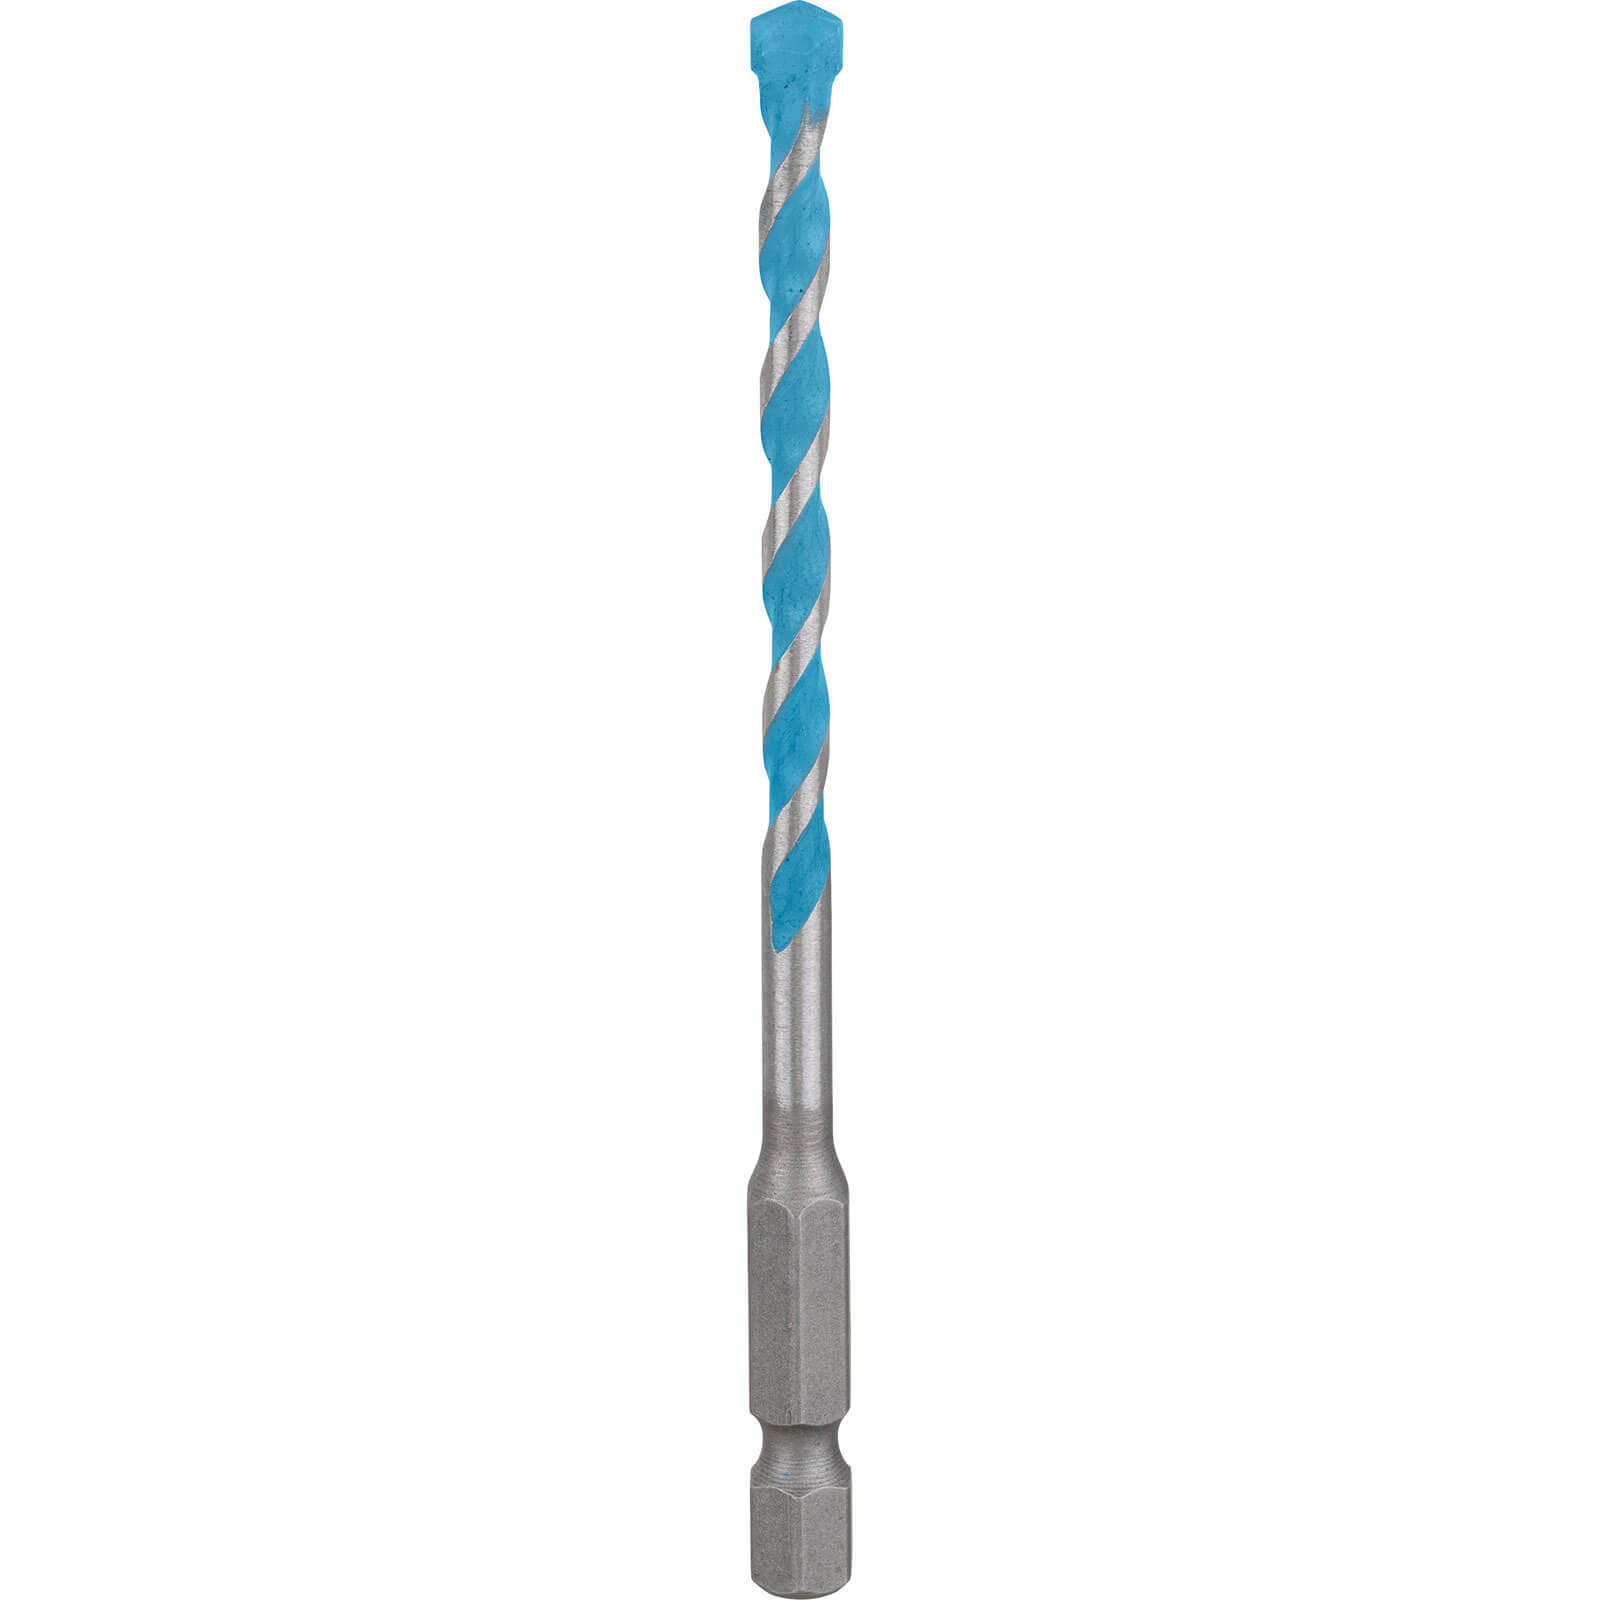 Image of Bosch Expert HEX-9 Multi Construction Drill Bit 5.5mm 100mm Pack of 1